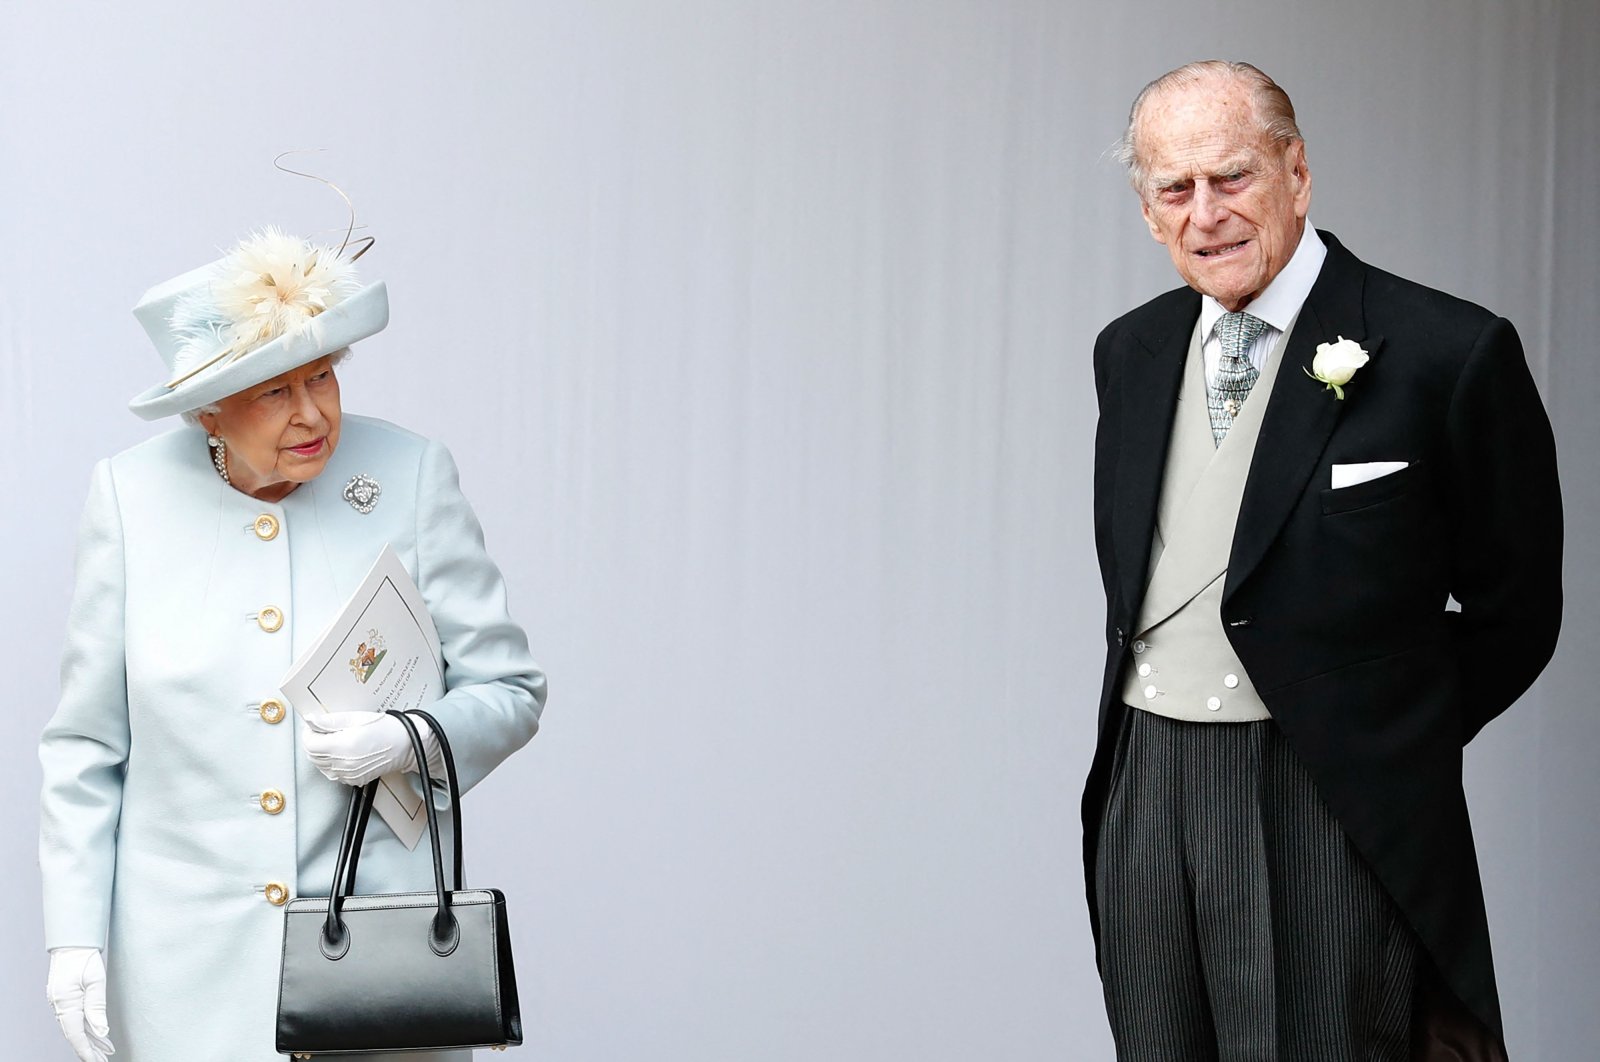 Britain's Queen Elizabeth II (L) and her husband Prince Philip, Duke of Edinburgh (R), wait for the carriage carrying Princess Eugenie of York and her husband, Jack Brooksbank, in Windsor, U.K., Oct. 12, 2018. (AFP Photo)